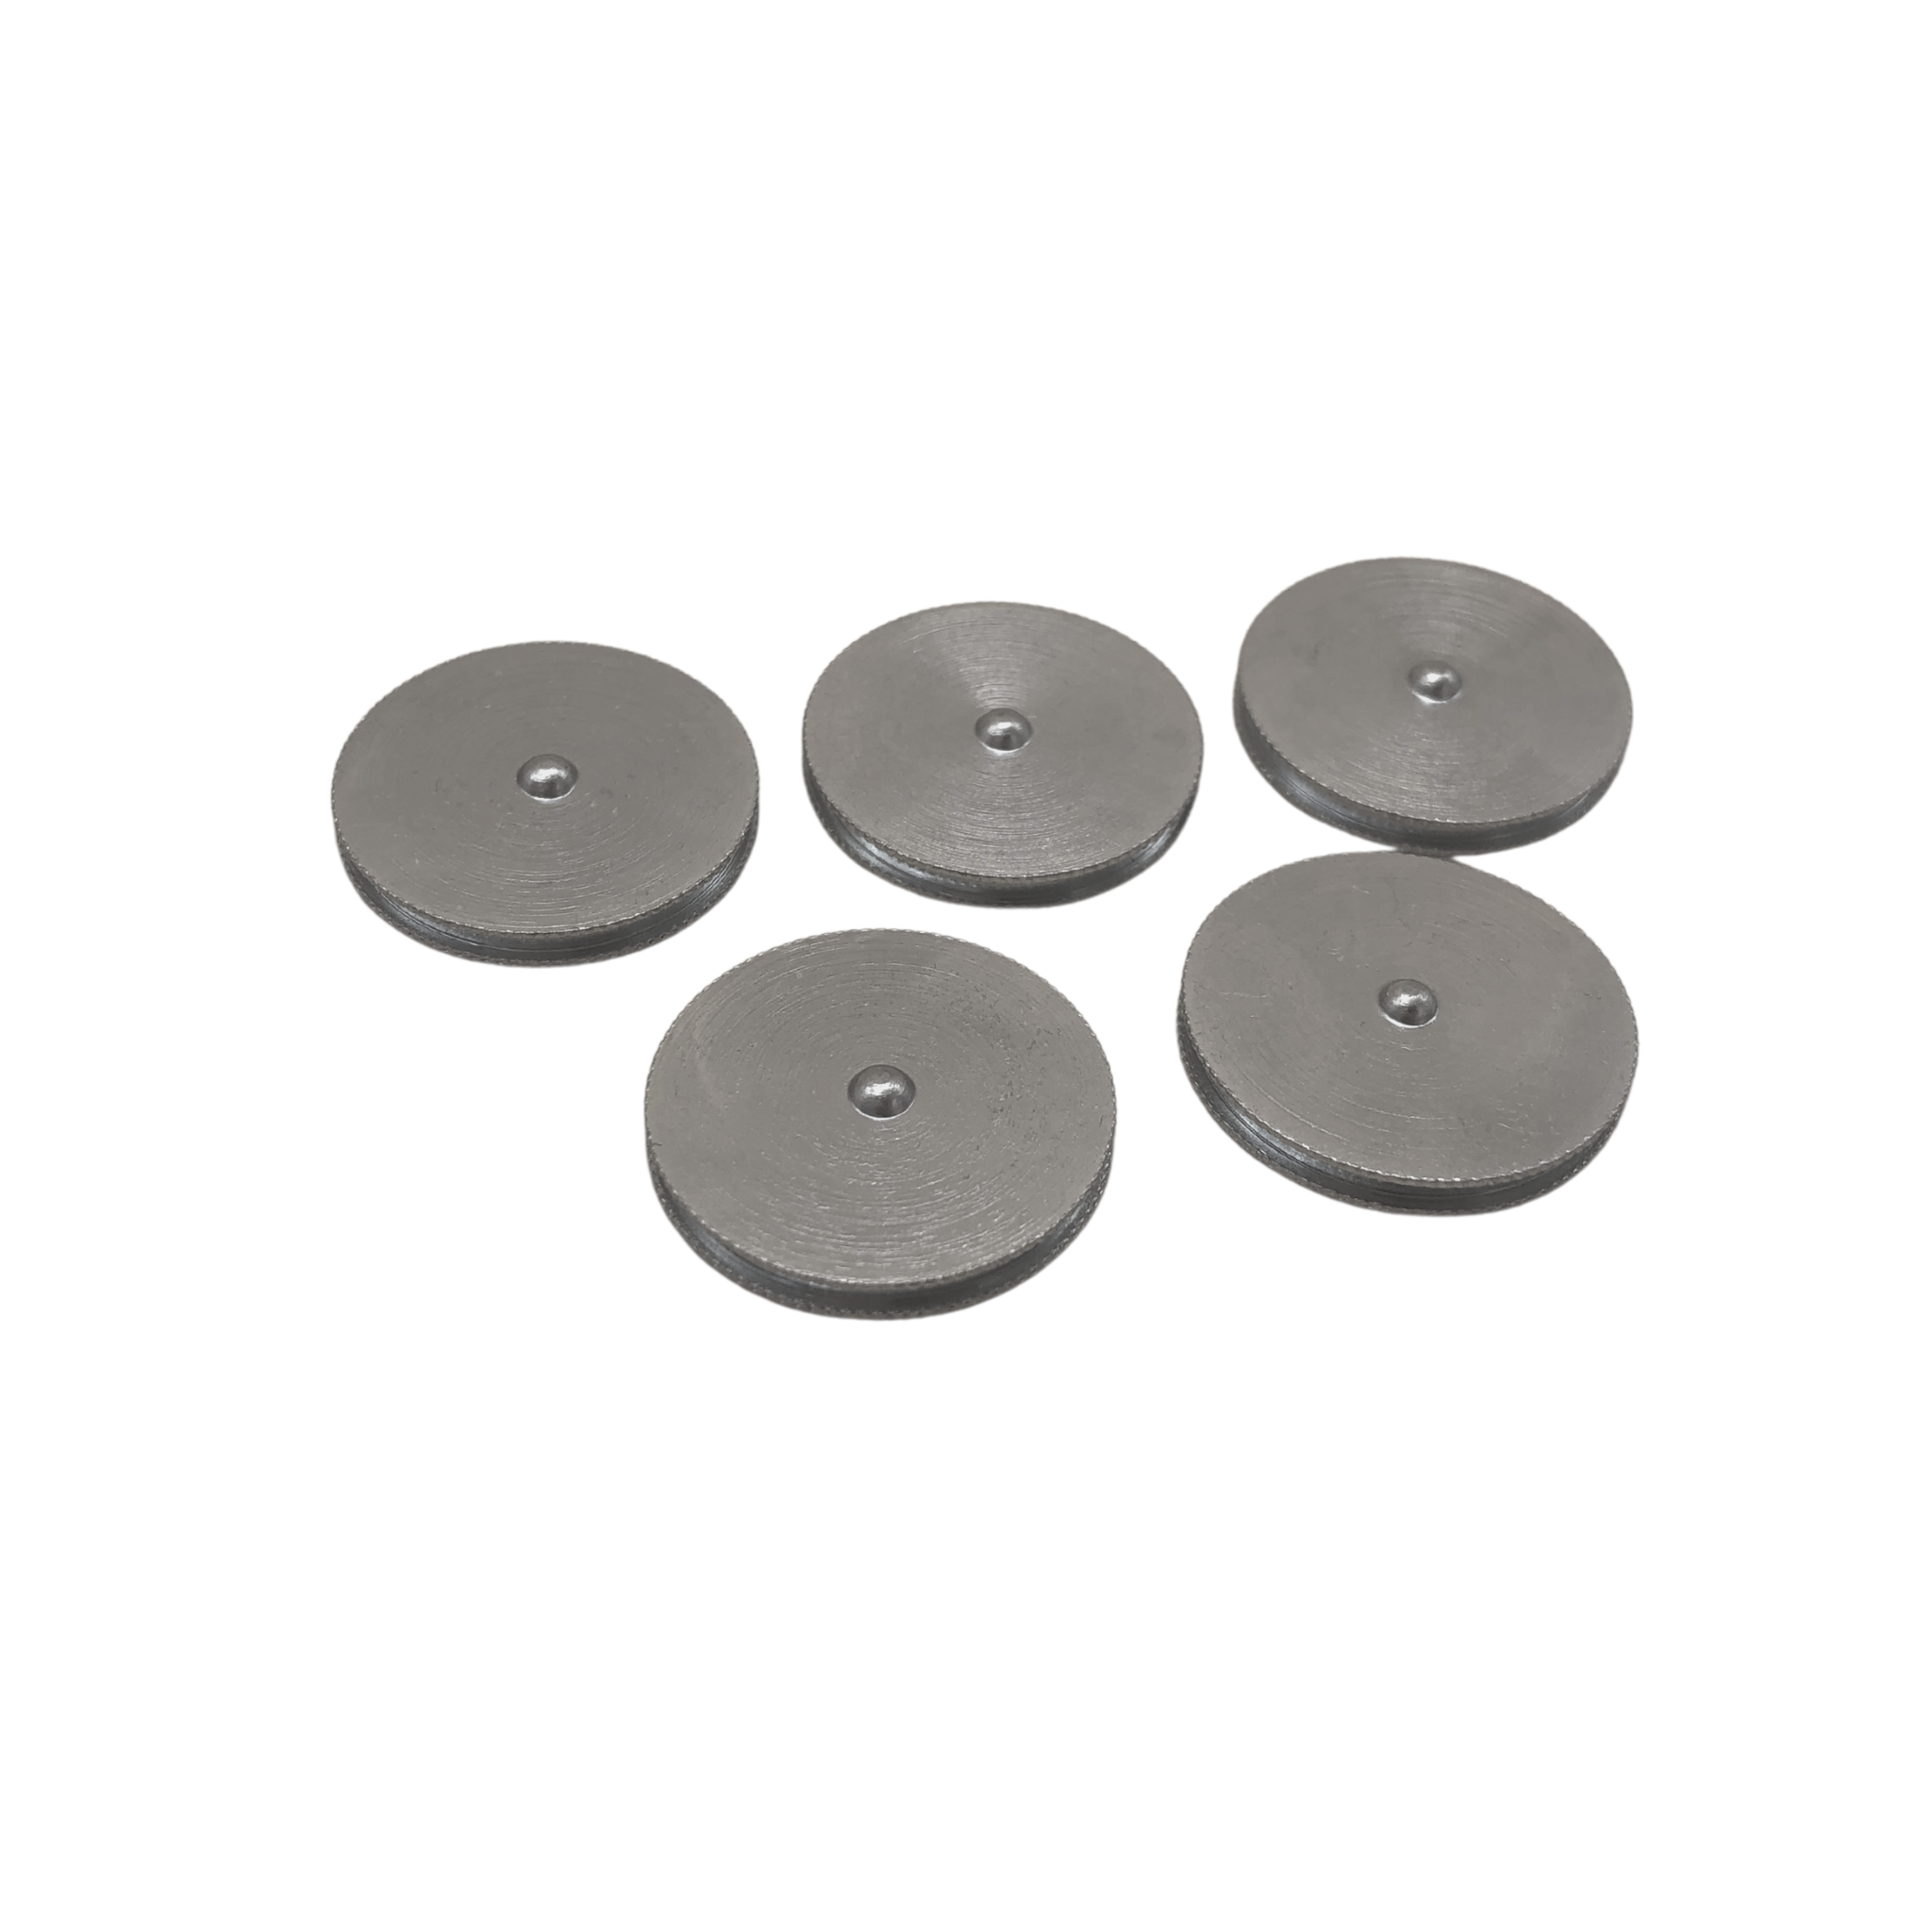 Adhesive discs for split-cast system, set of 5